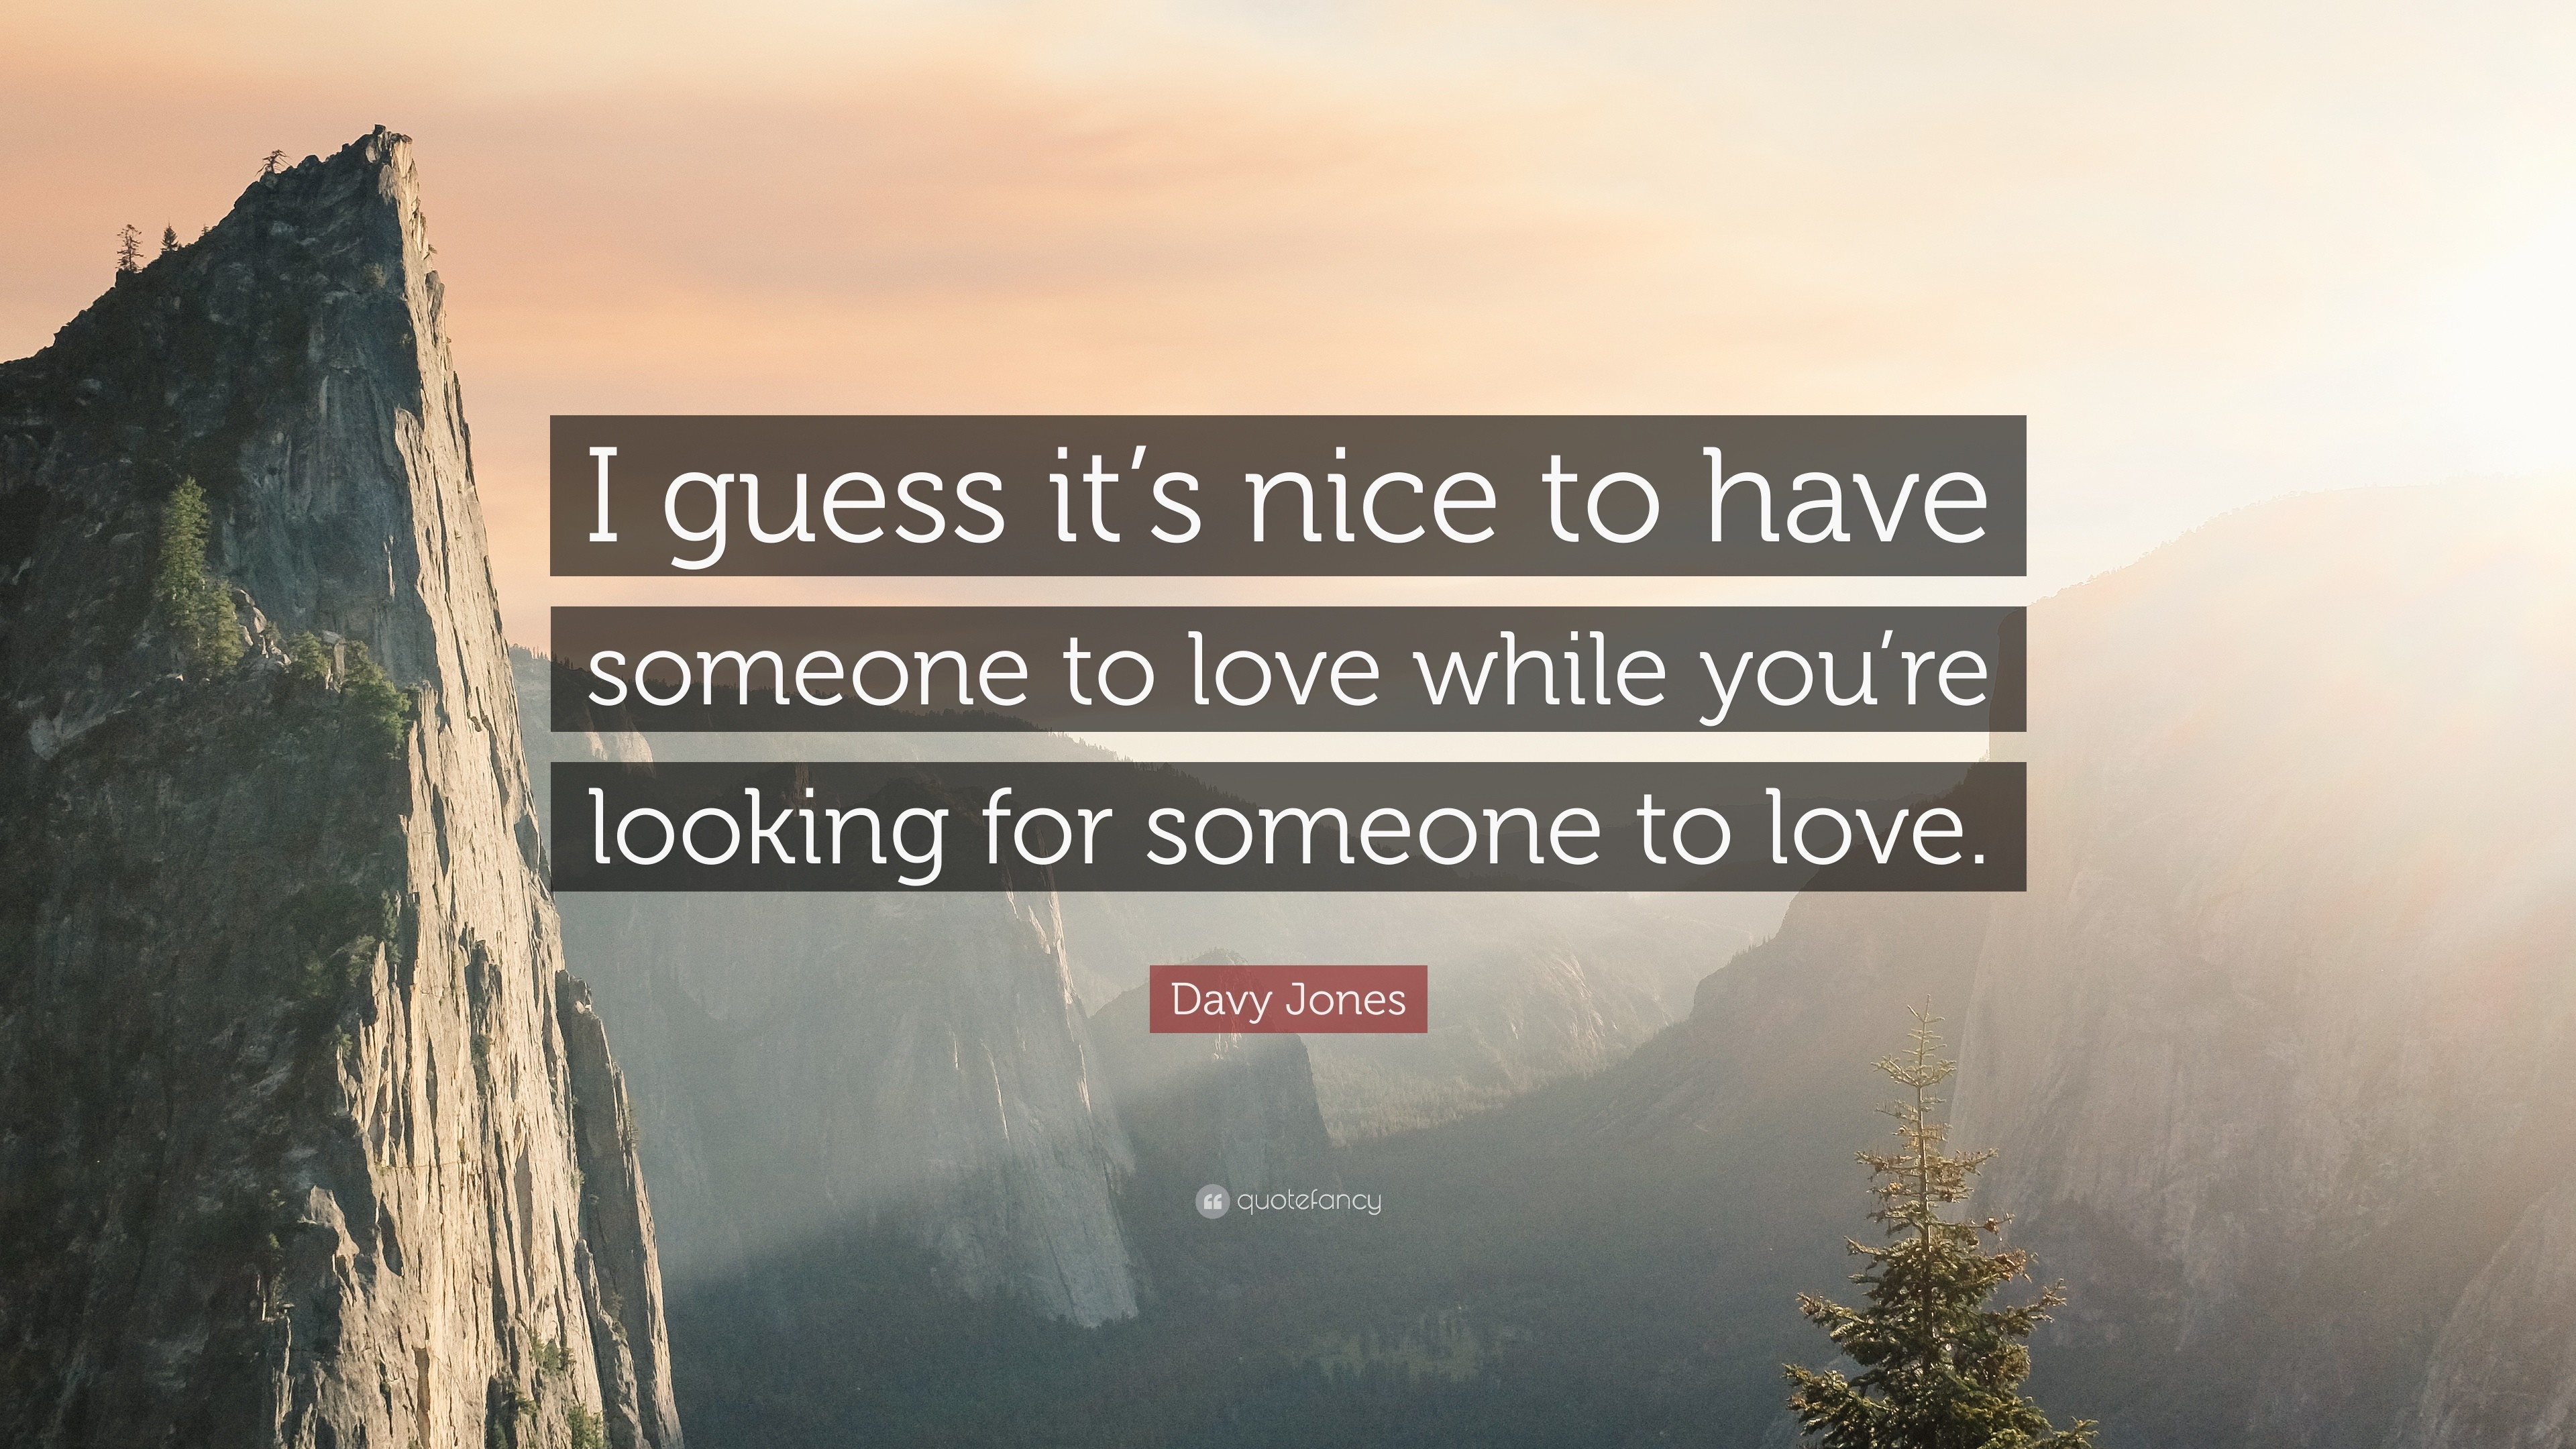 3840x2160 Davy Jones Quote: “I guess it's nice to have someone to love while you